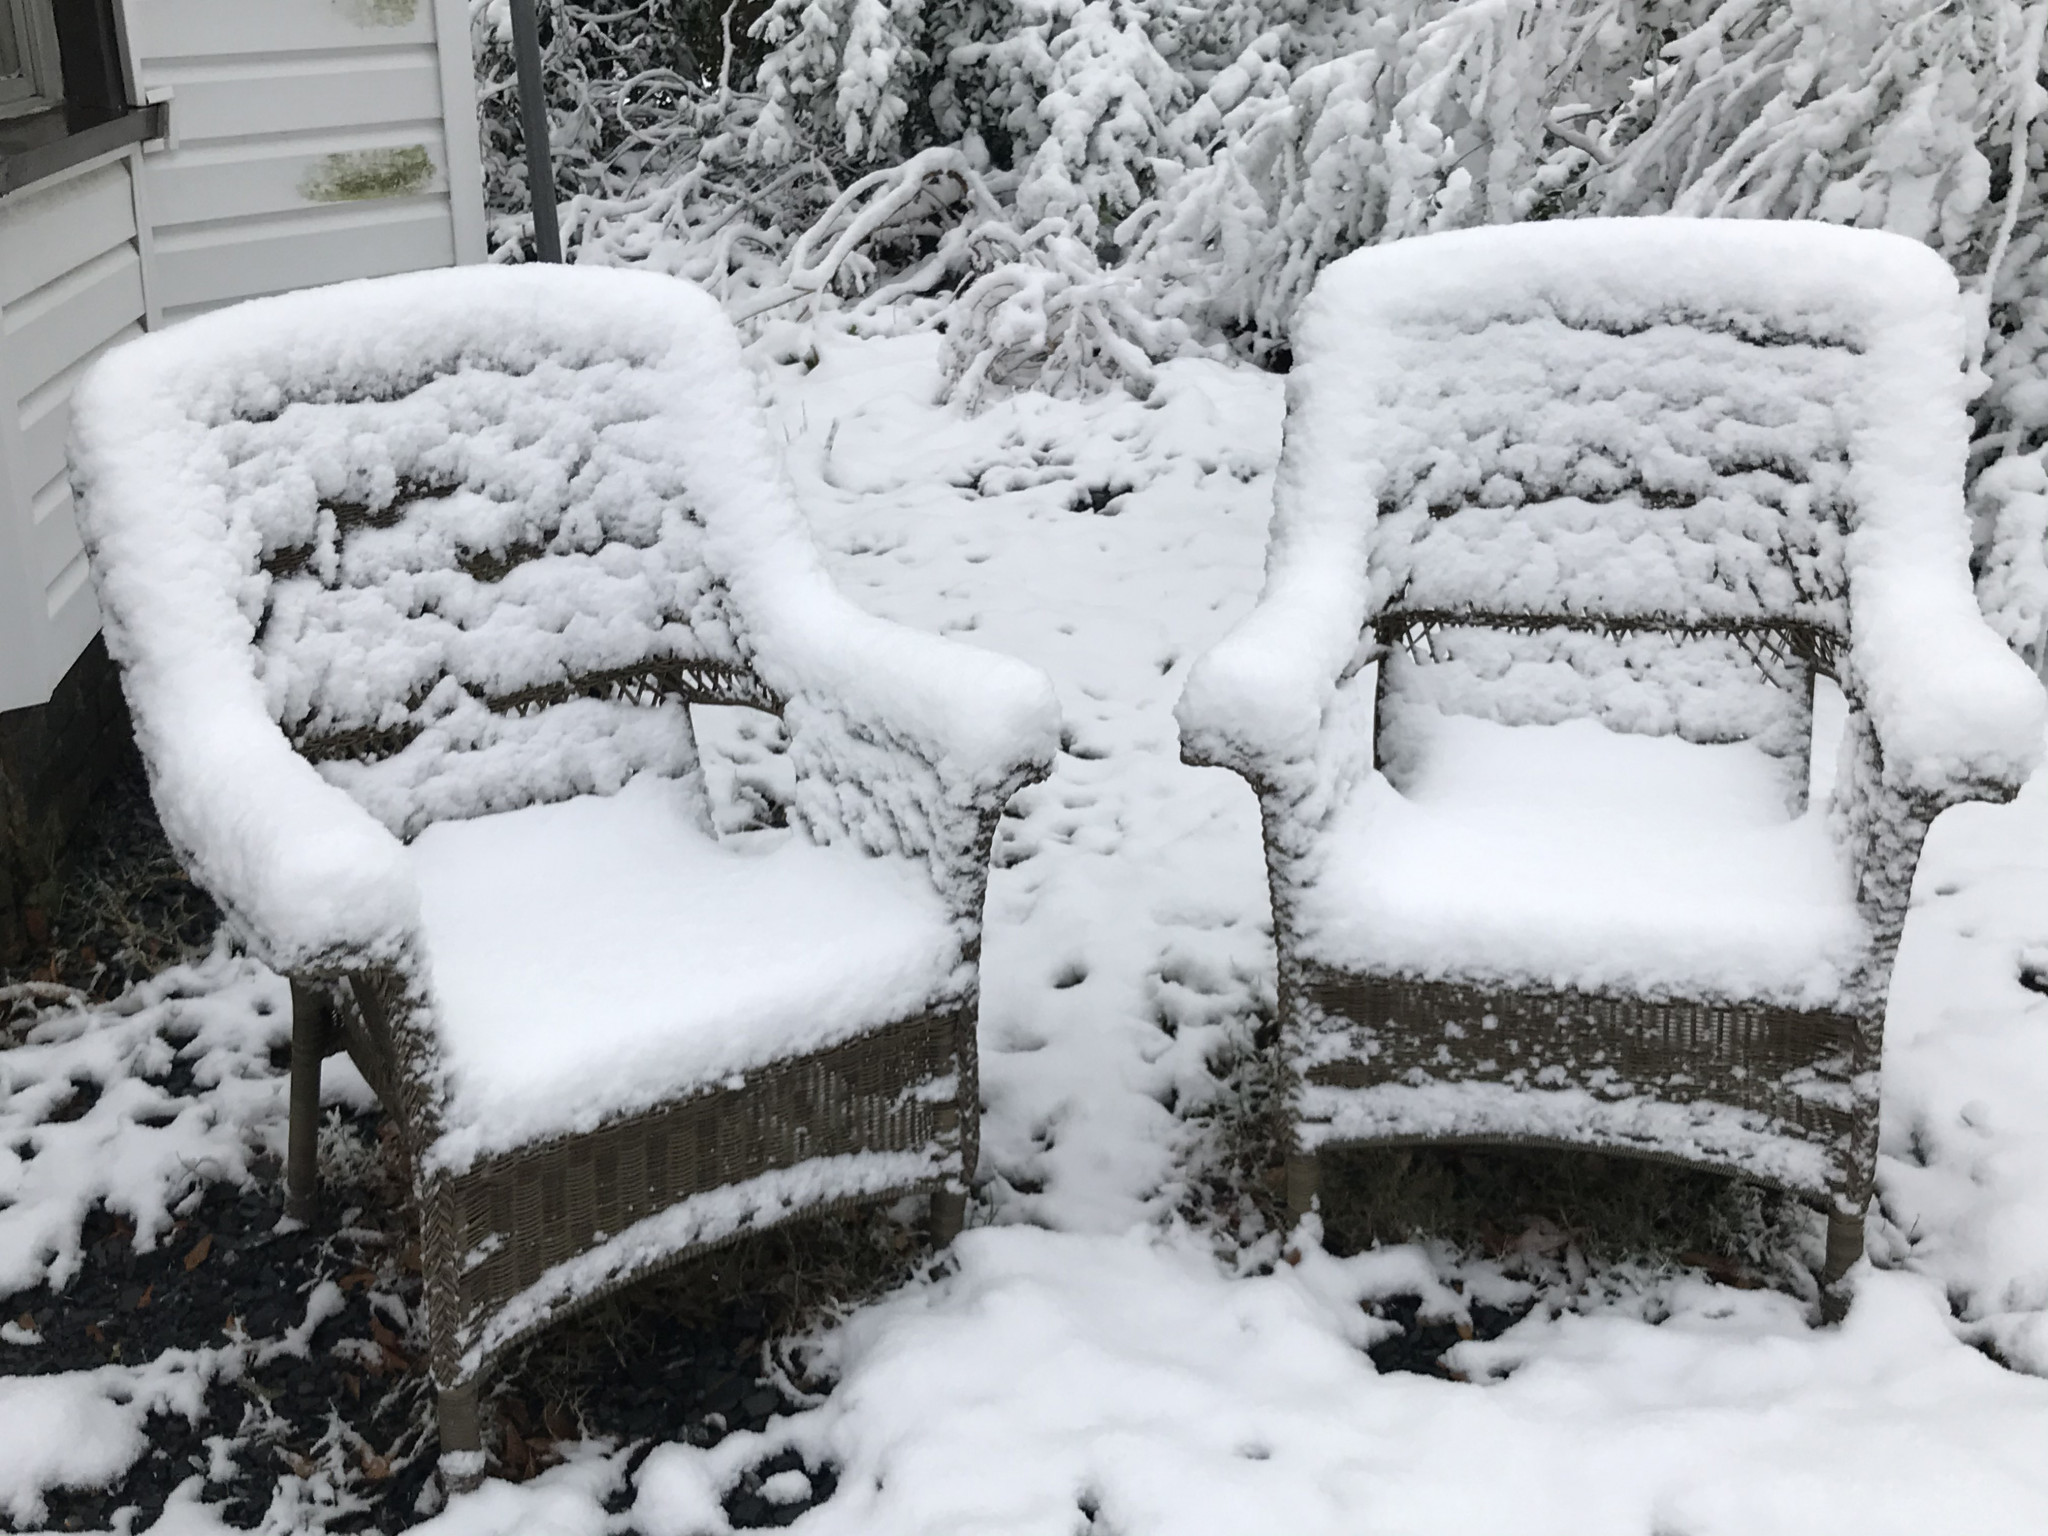 Some frosty chairs on an Evans Street lawn - Leader photo by Caleb Daniel